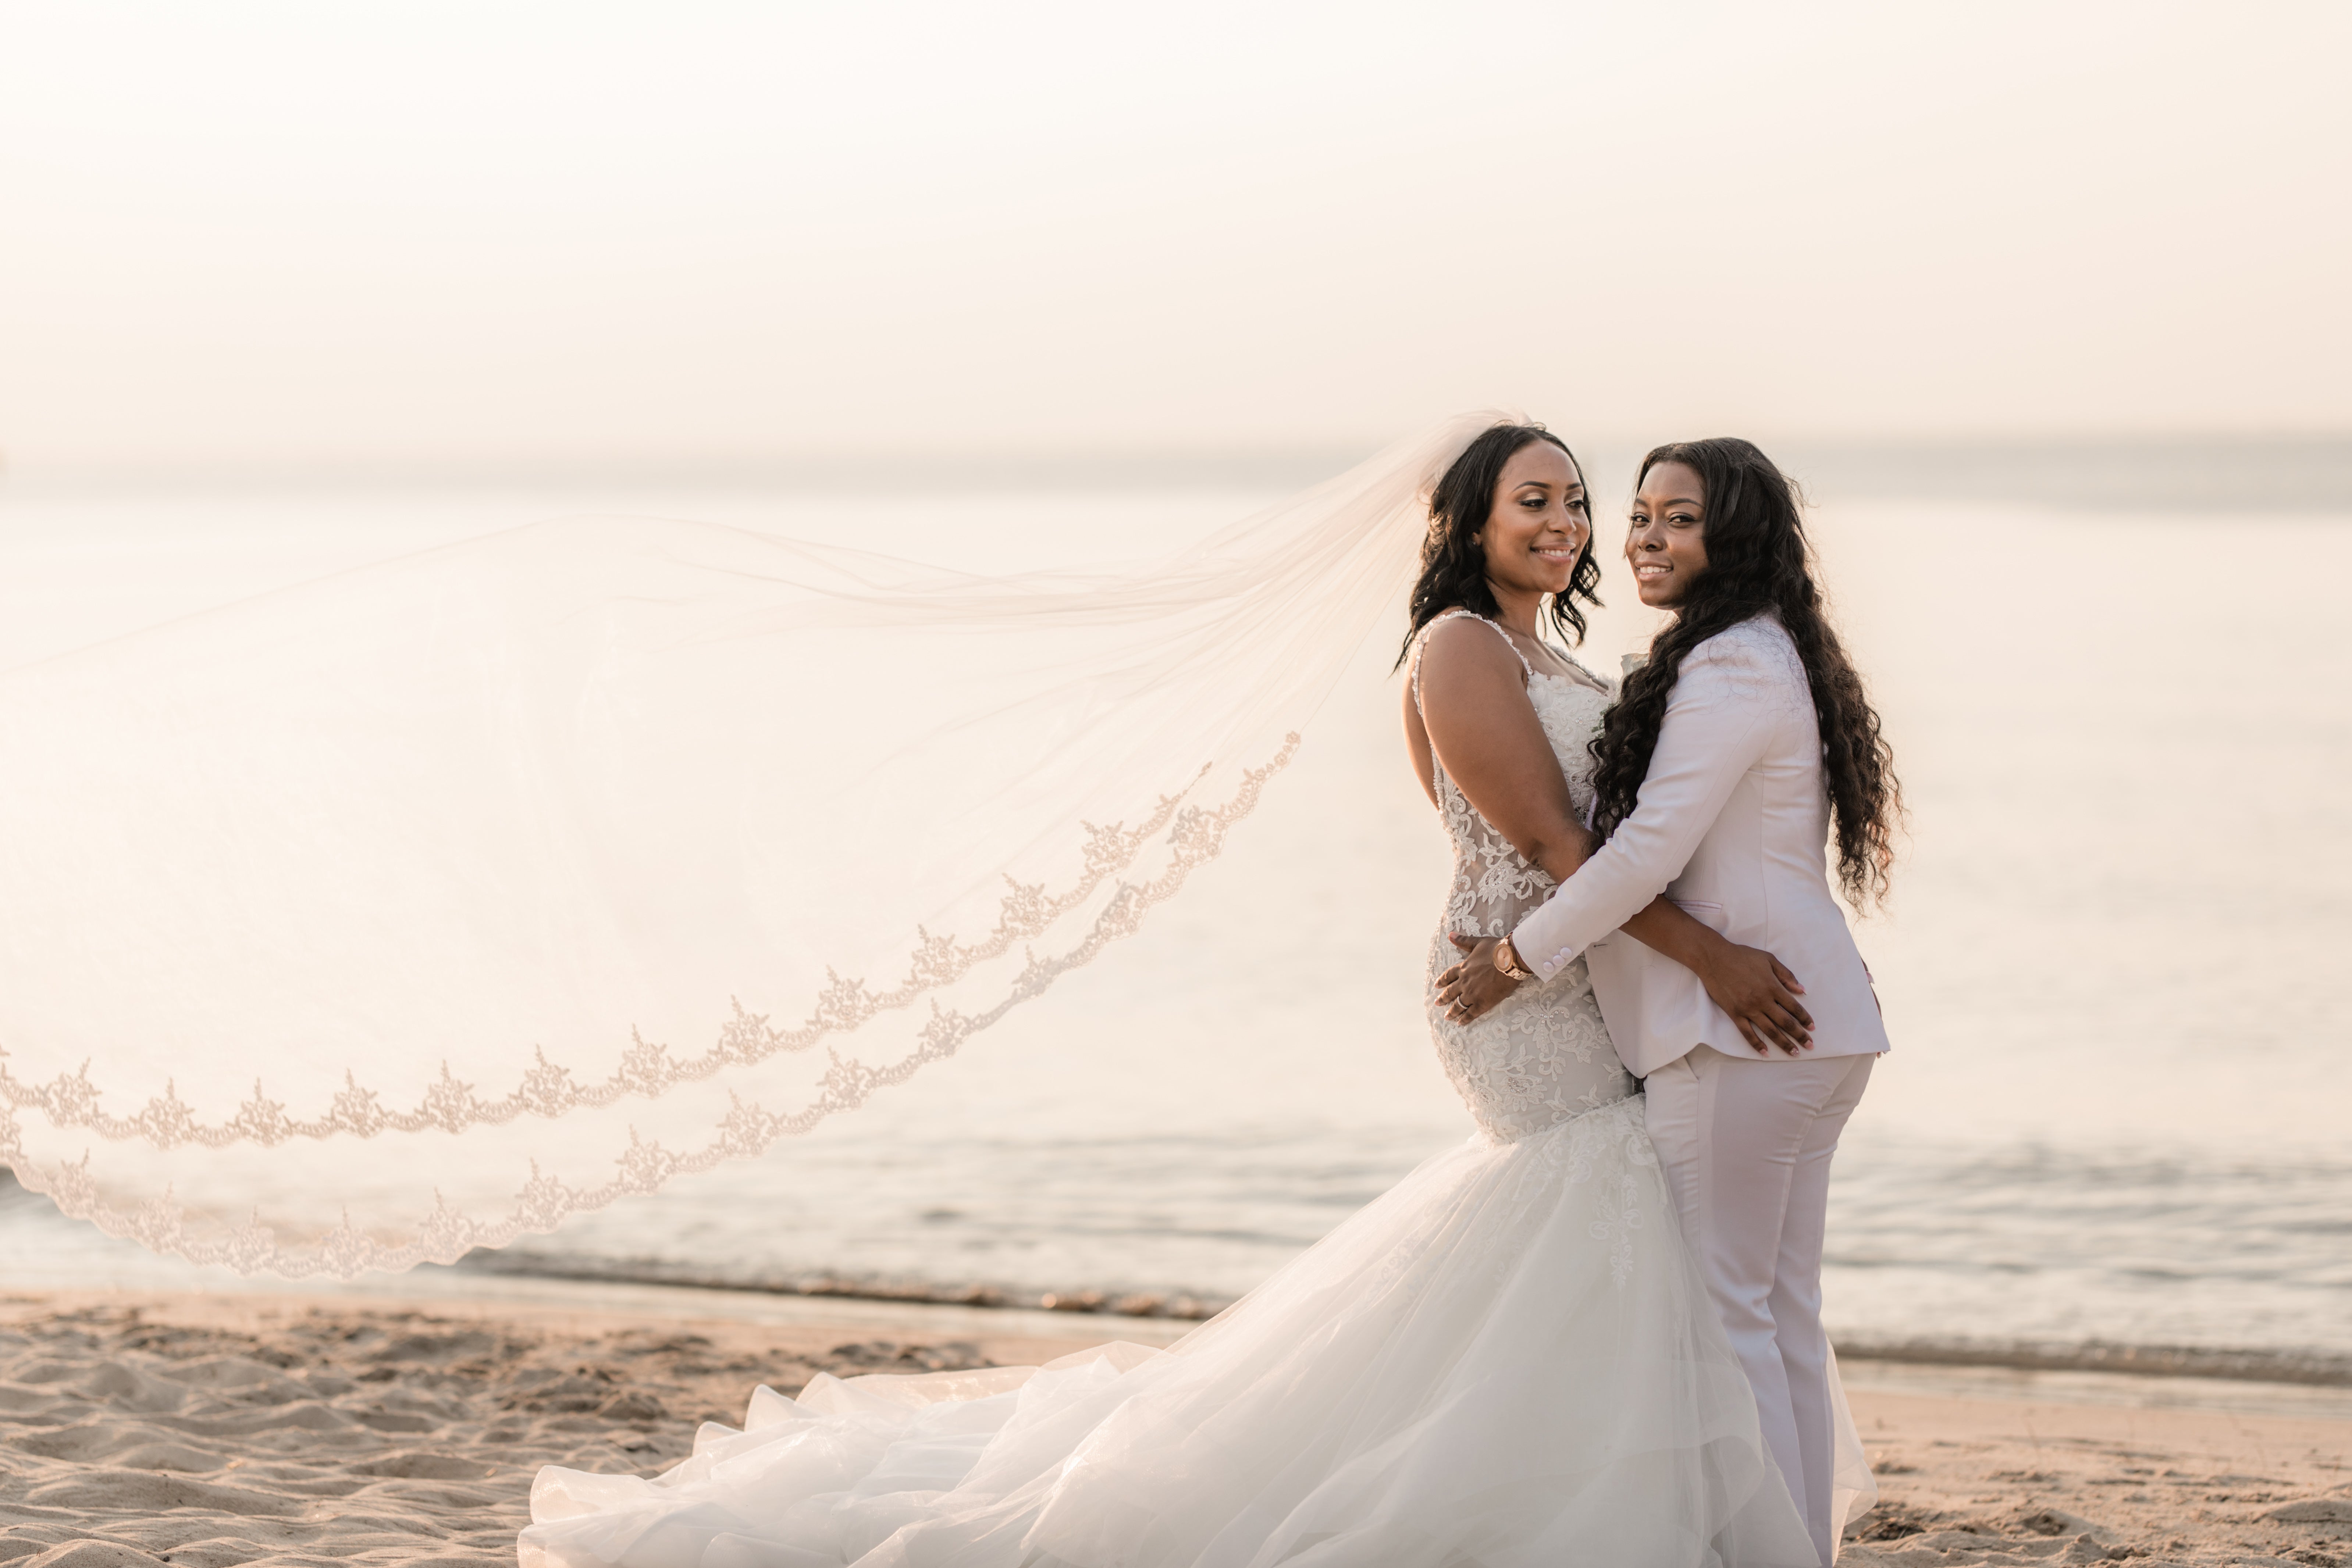 Bridal Bliss: Chantel And Shavonia's Love Shined Through Their Stunning Wedding Photos